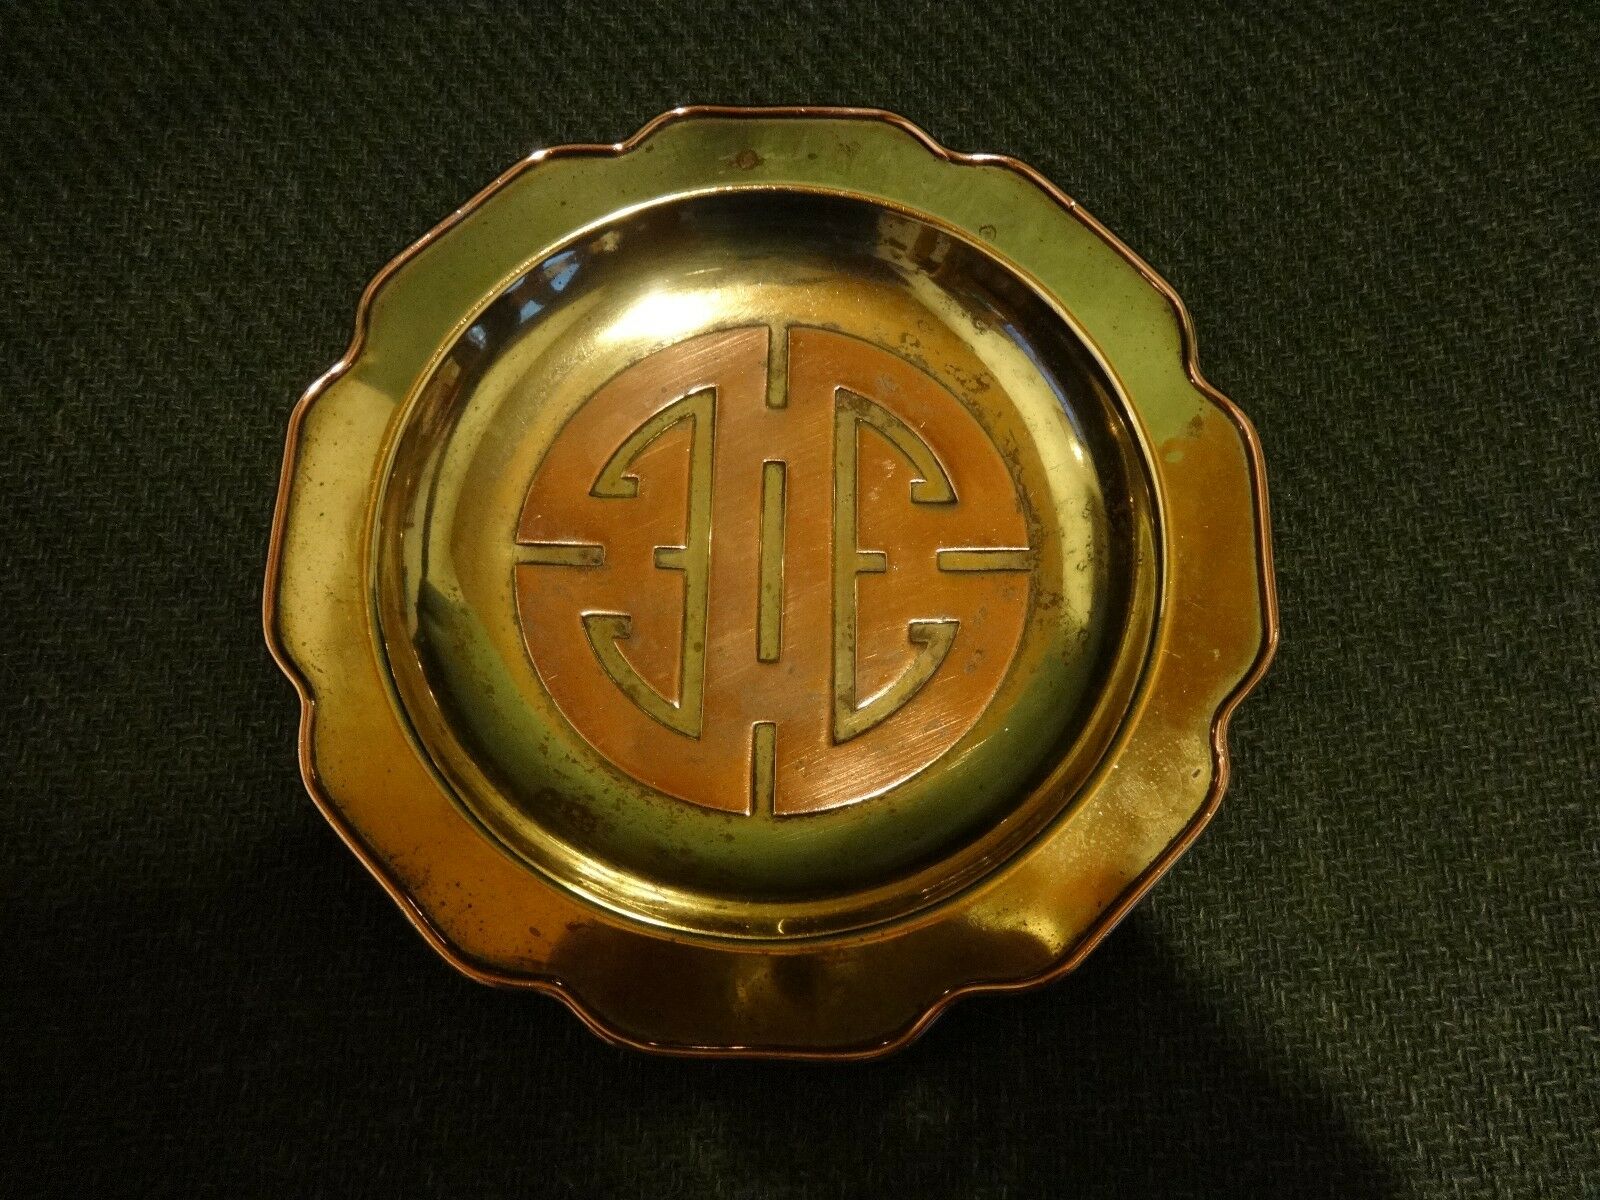 WOCO VINTAGE RARE BRASS & COPPER METAL TRAY, MADE IN HONG KONG BY WOCO